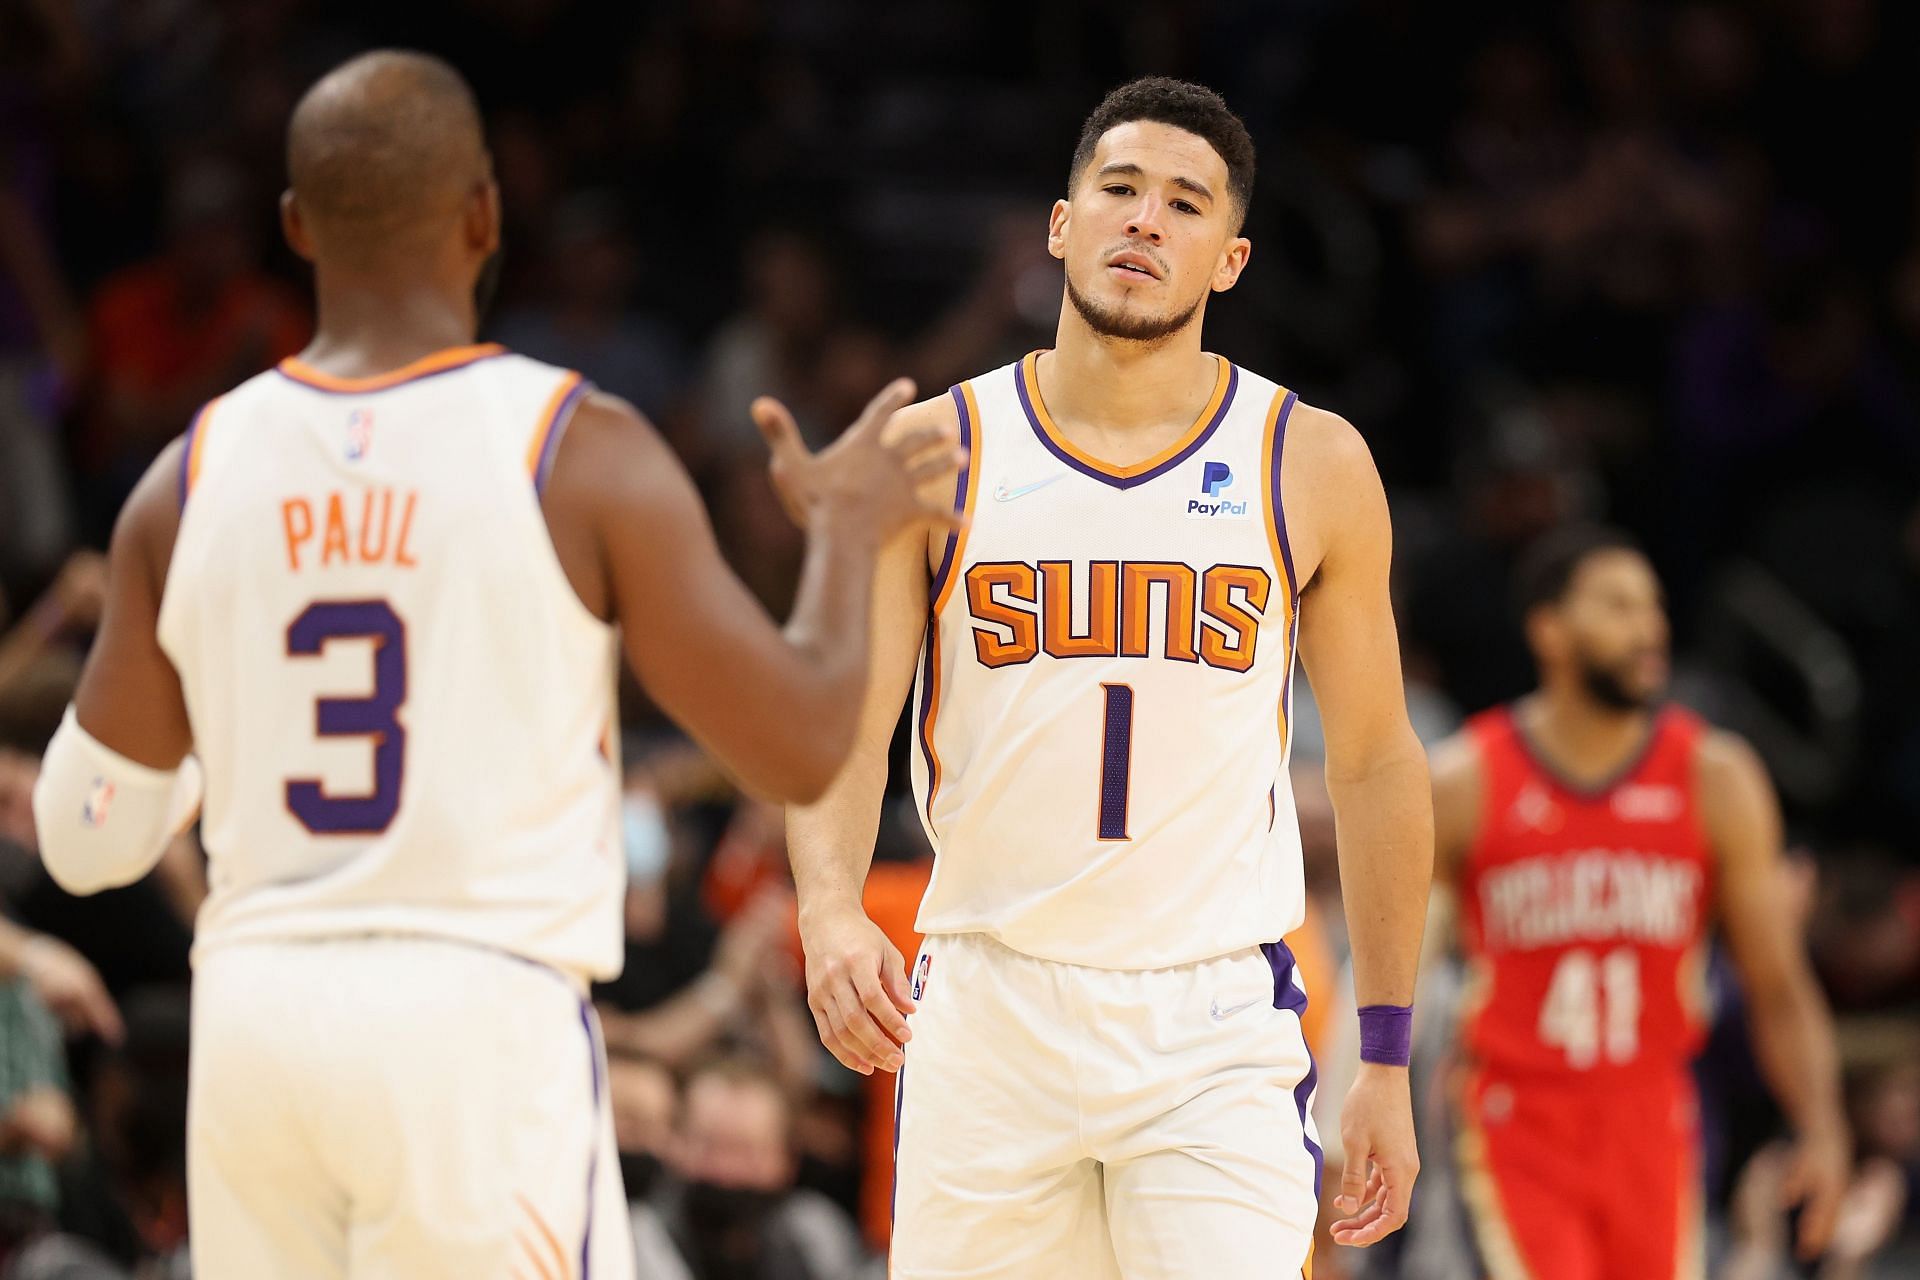 Devin Booker #1 of the Phoenix Suns reacts to Chris Paul #3 after Booker hit a three-point shot against the New Orleans Pelicans